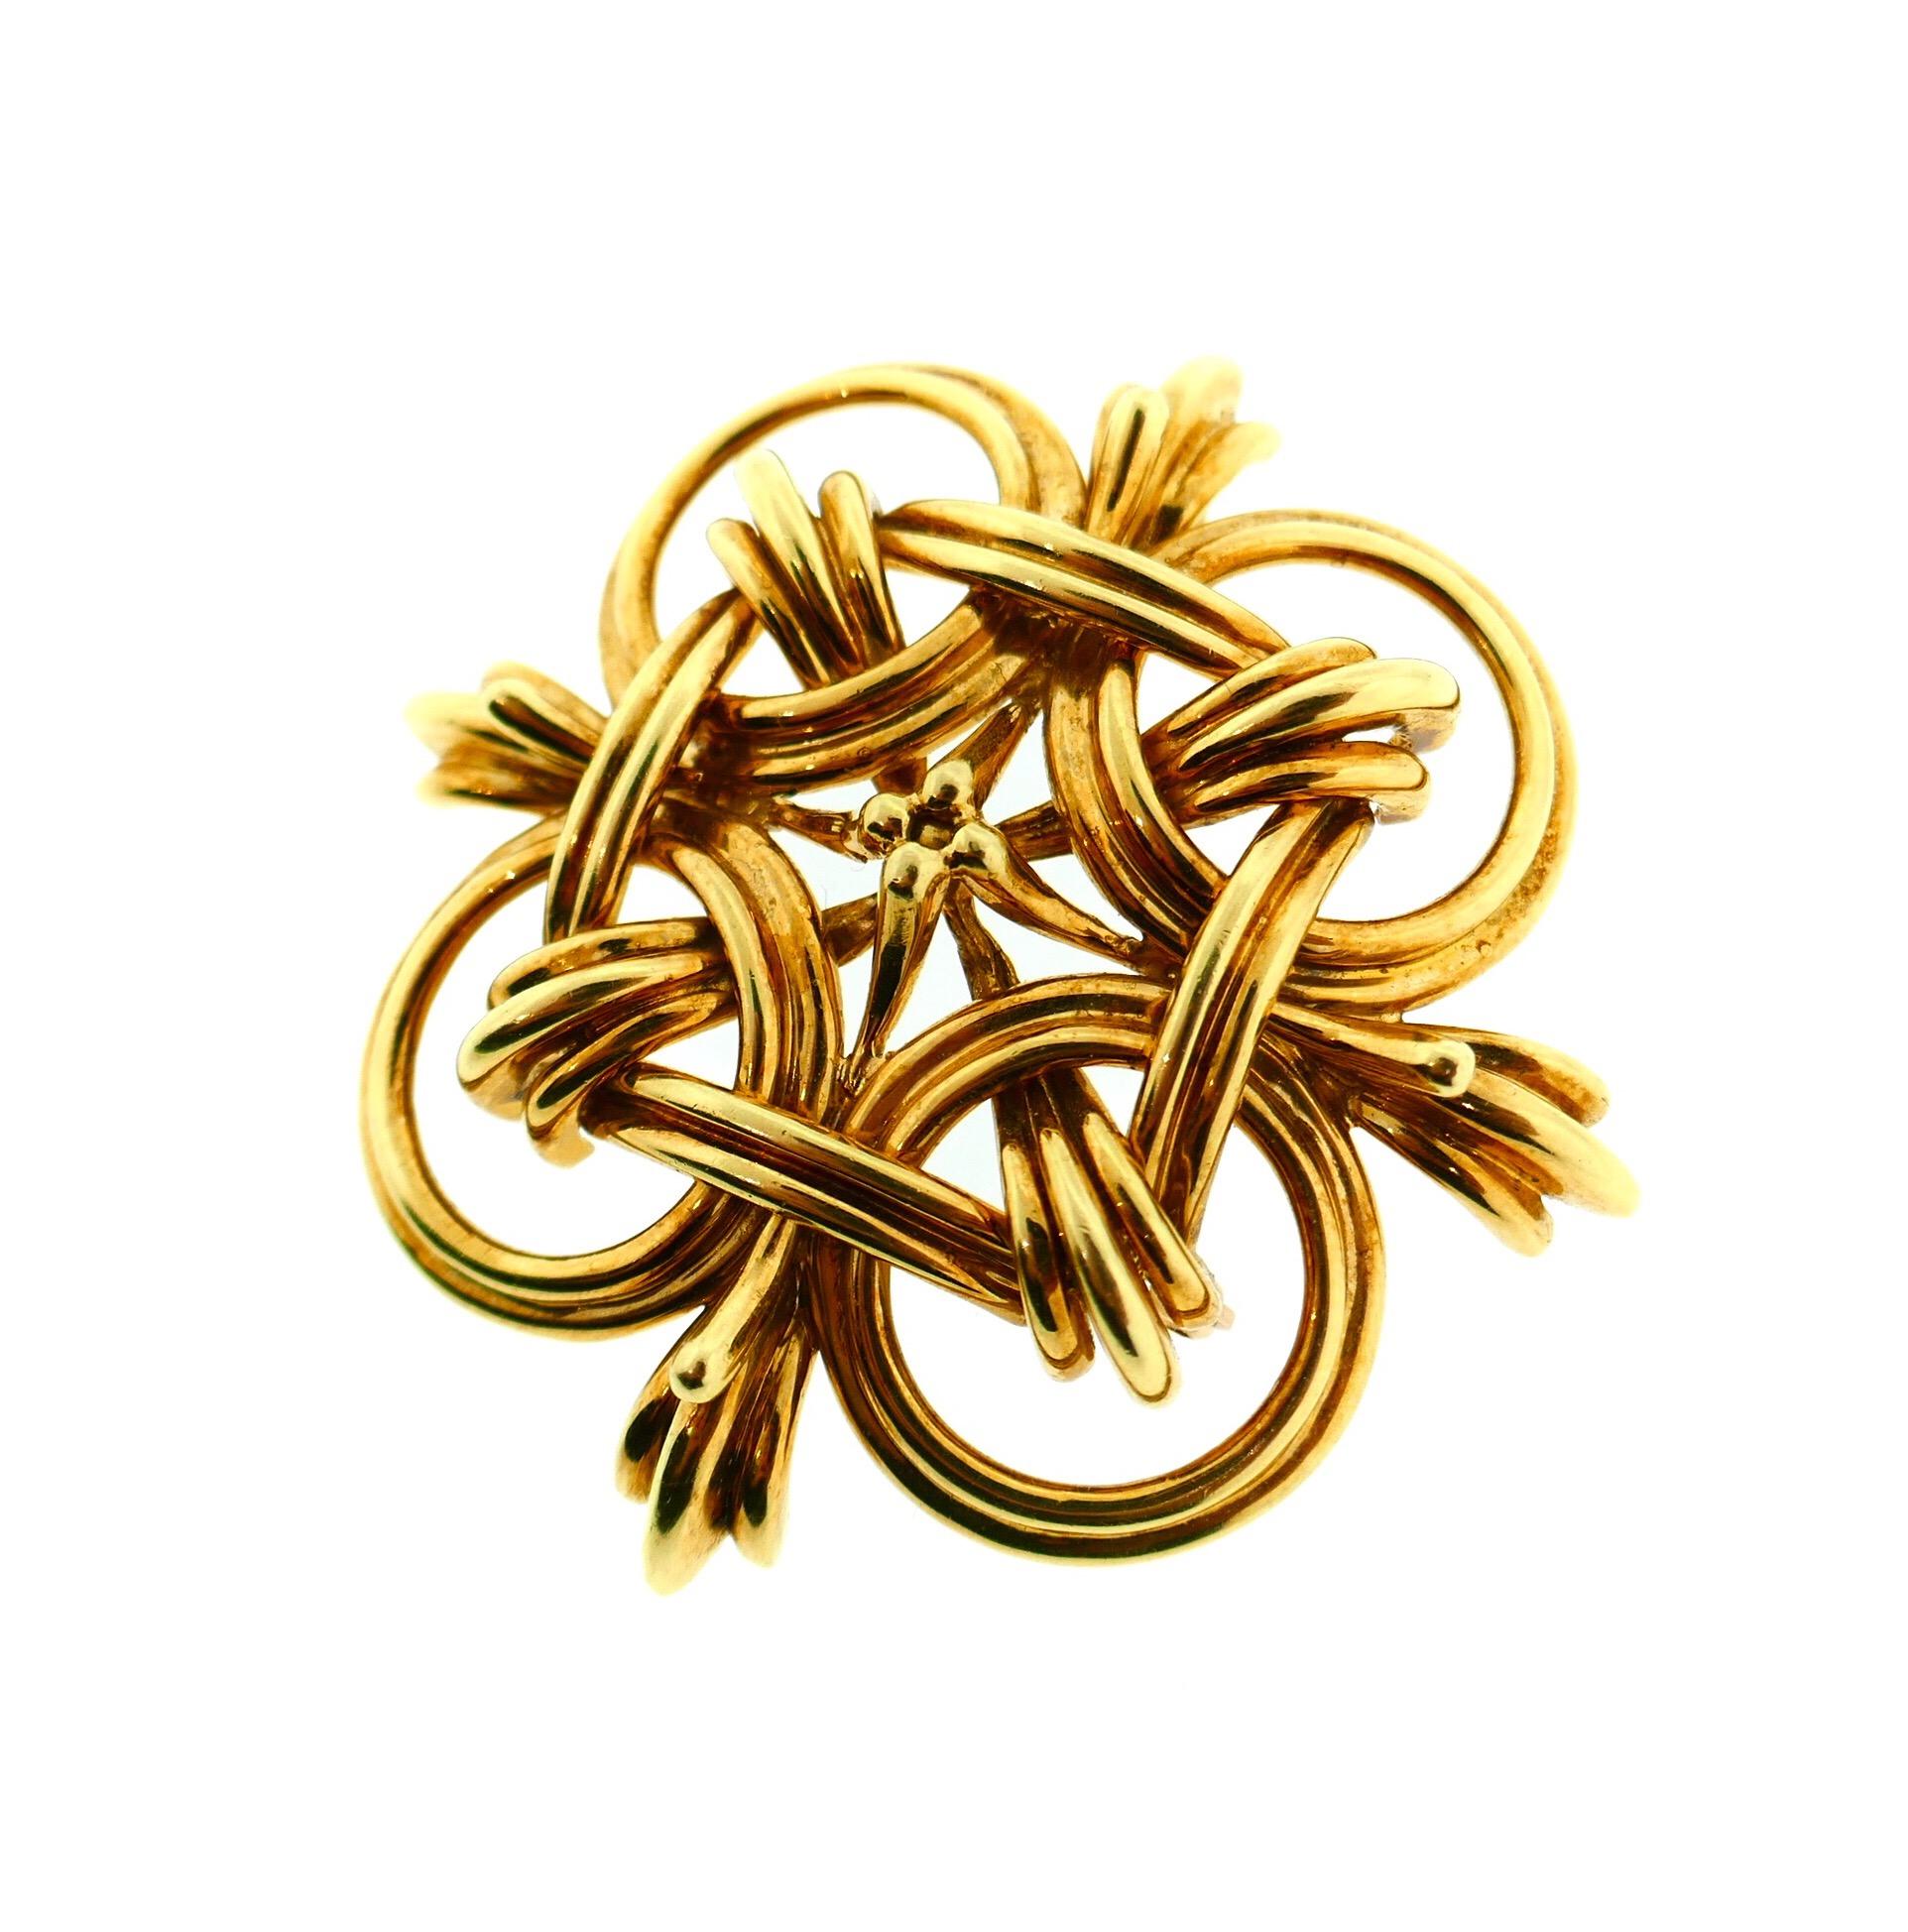 Cartier 18 Karat Yellow Gold Pendant / Brooch

This absolutely stunning vintage Cartier piece can be worn as a pendant or a brooch. The piece features an intricate design in amazing detail. It is substantial in size and definitely stands